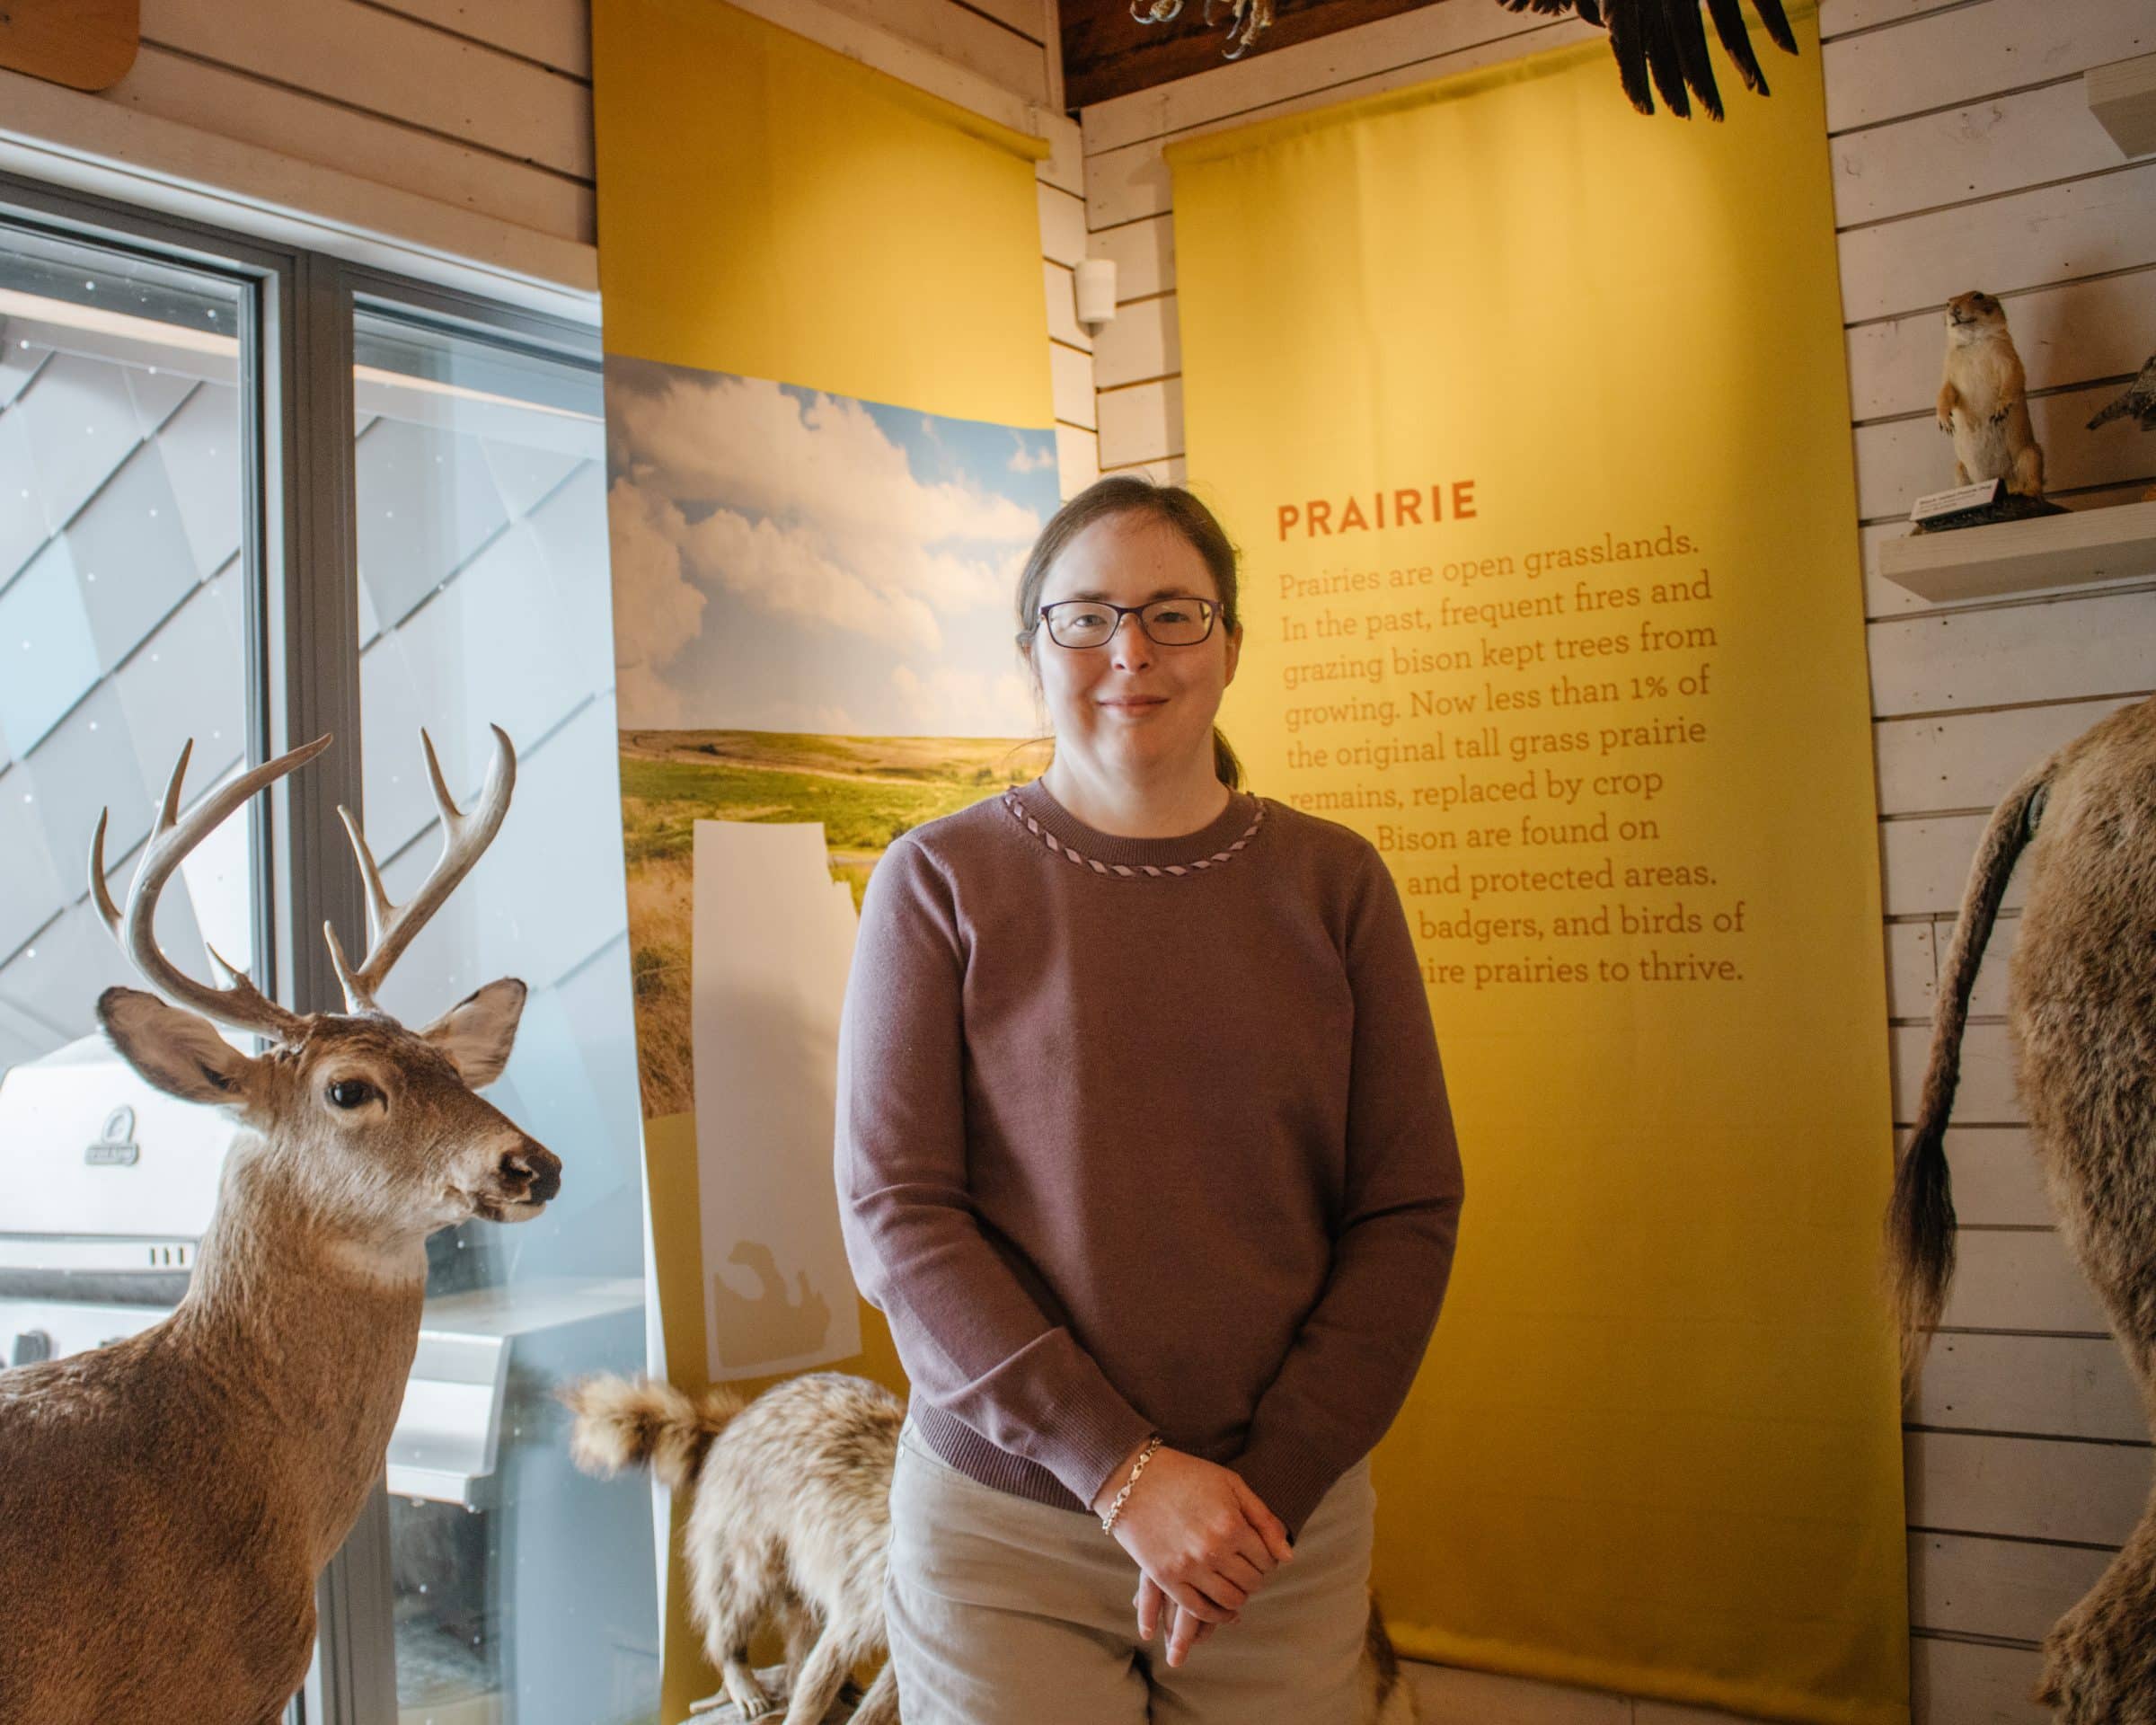 Erin stands in touch museum in front of taxidermy deer, and informational banner reading "prairie".